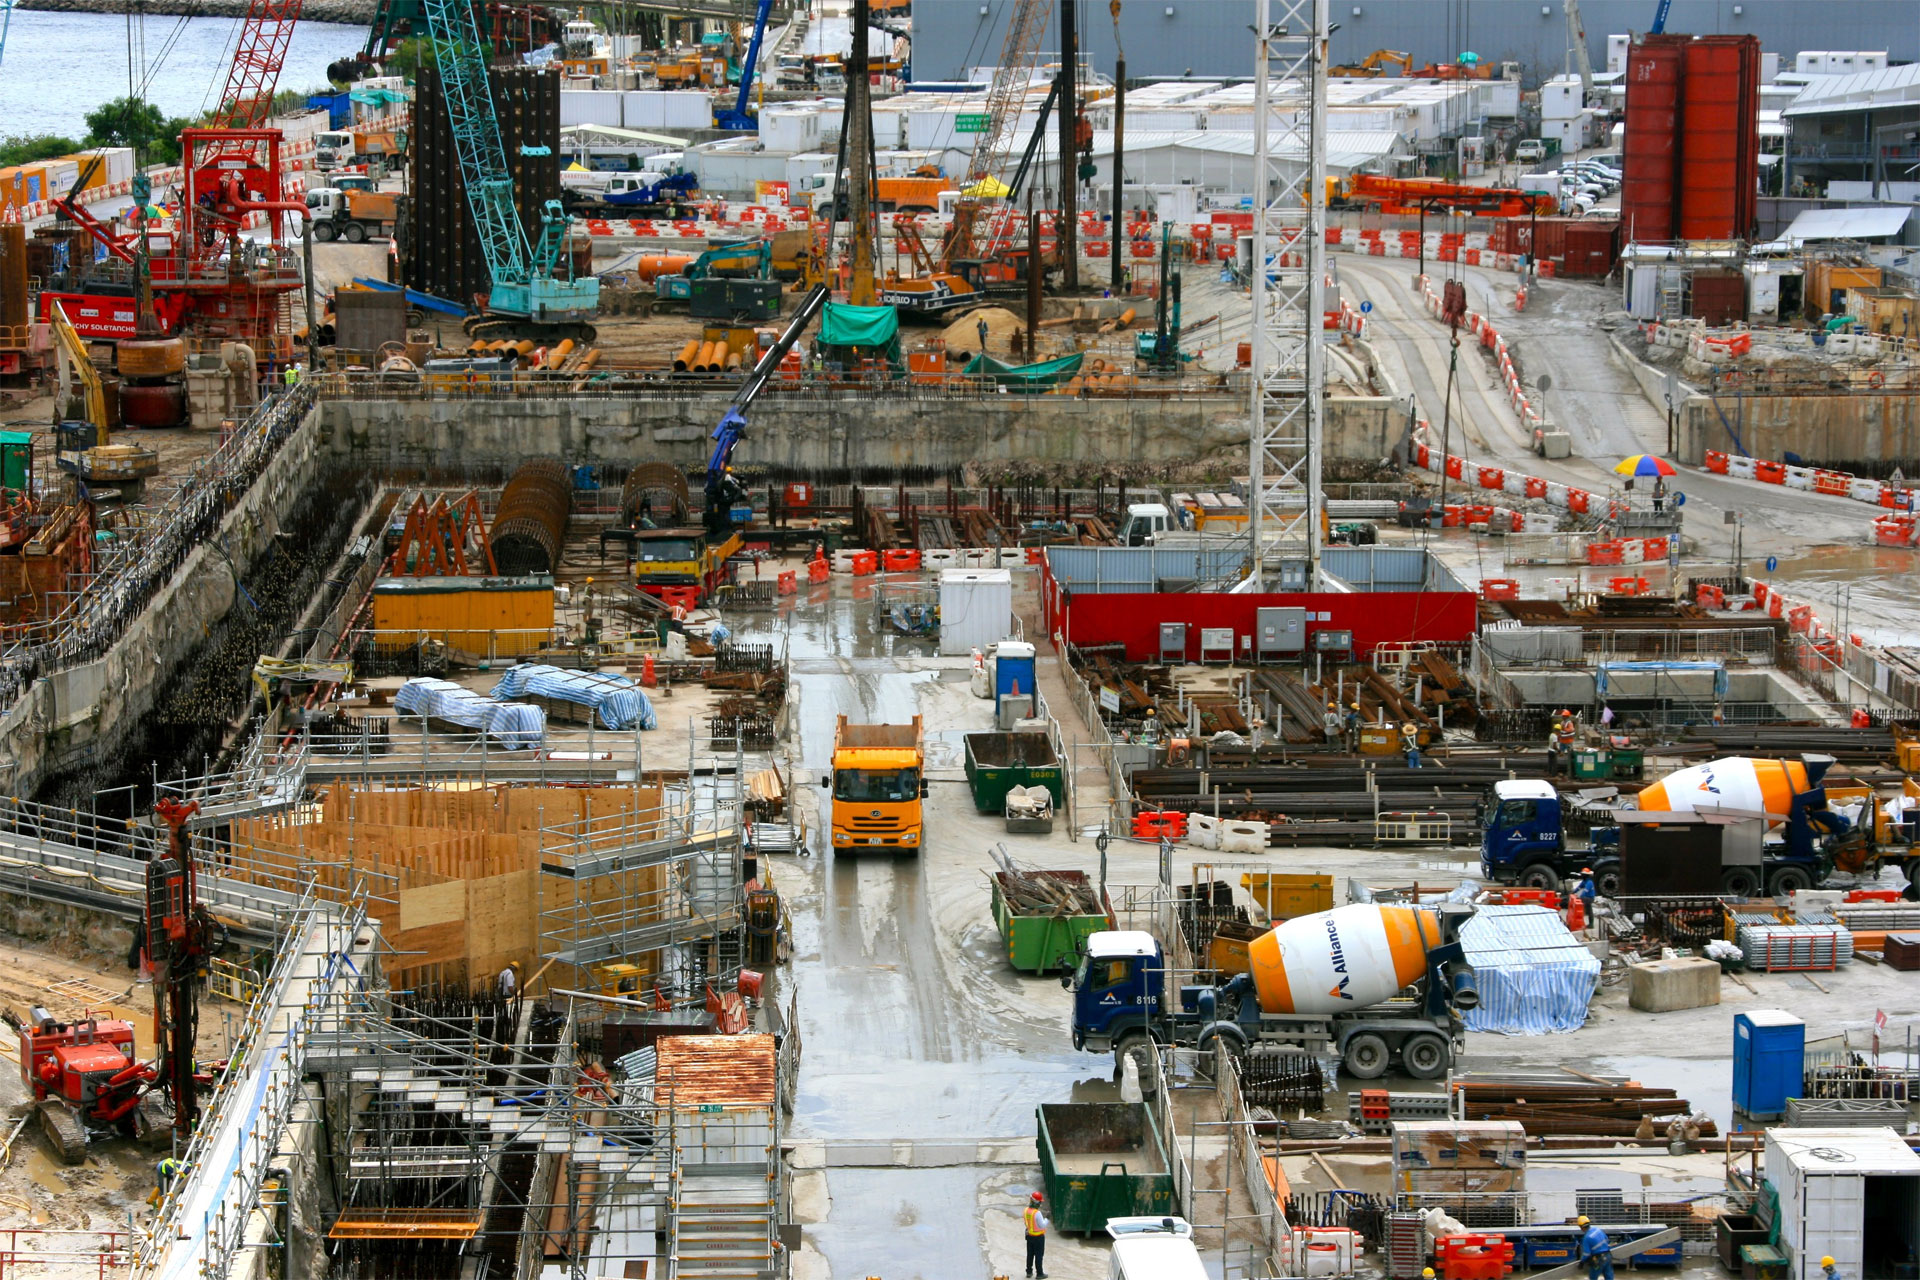 View from above of a large construction site with cranes, ready-mixed trucks, other lorries and construction workers